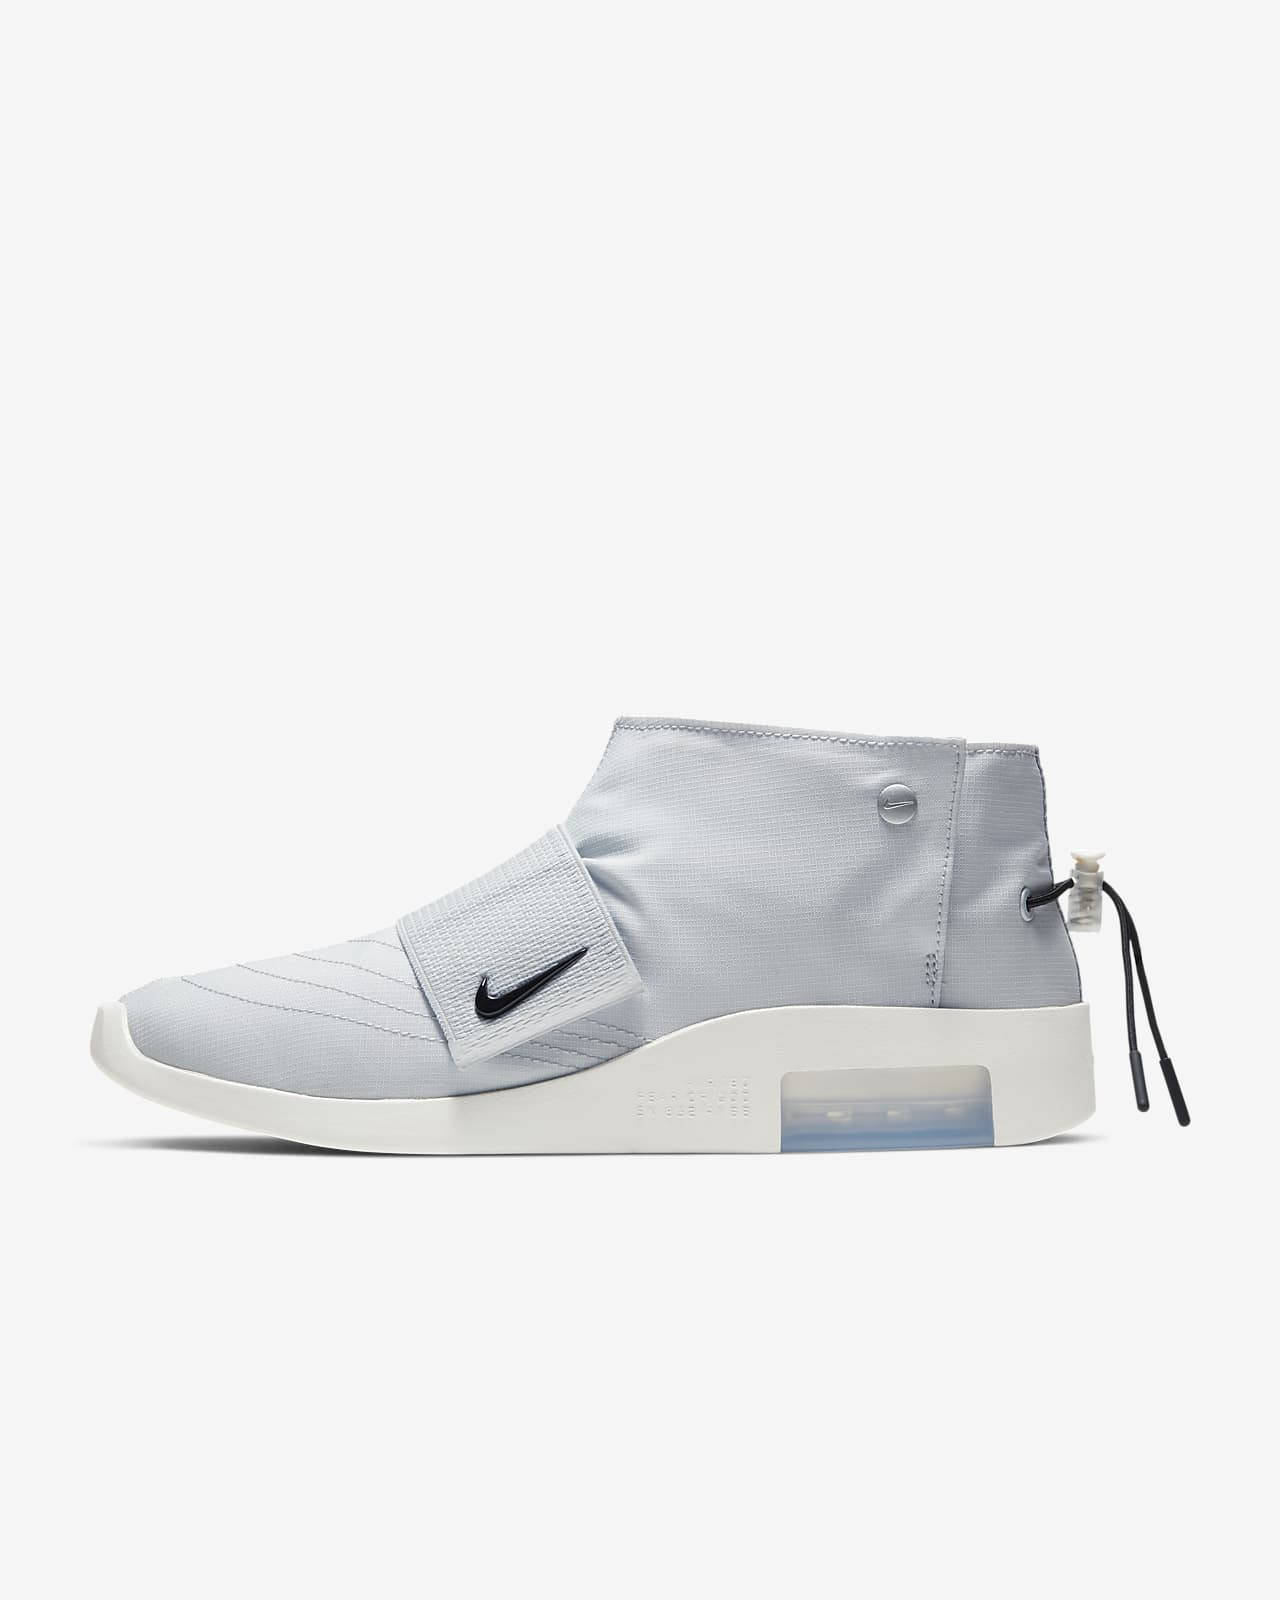 Nike Air x Fear of God Men's Moccasin 